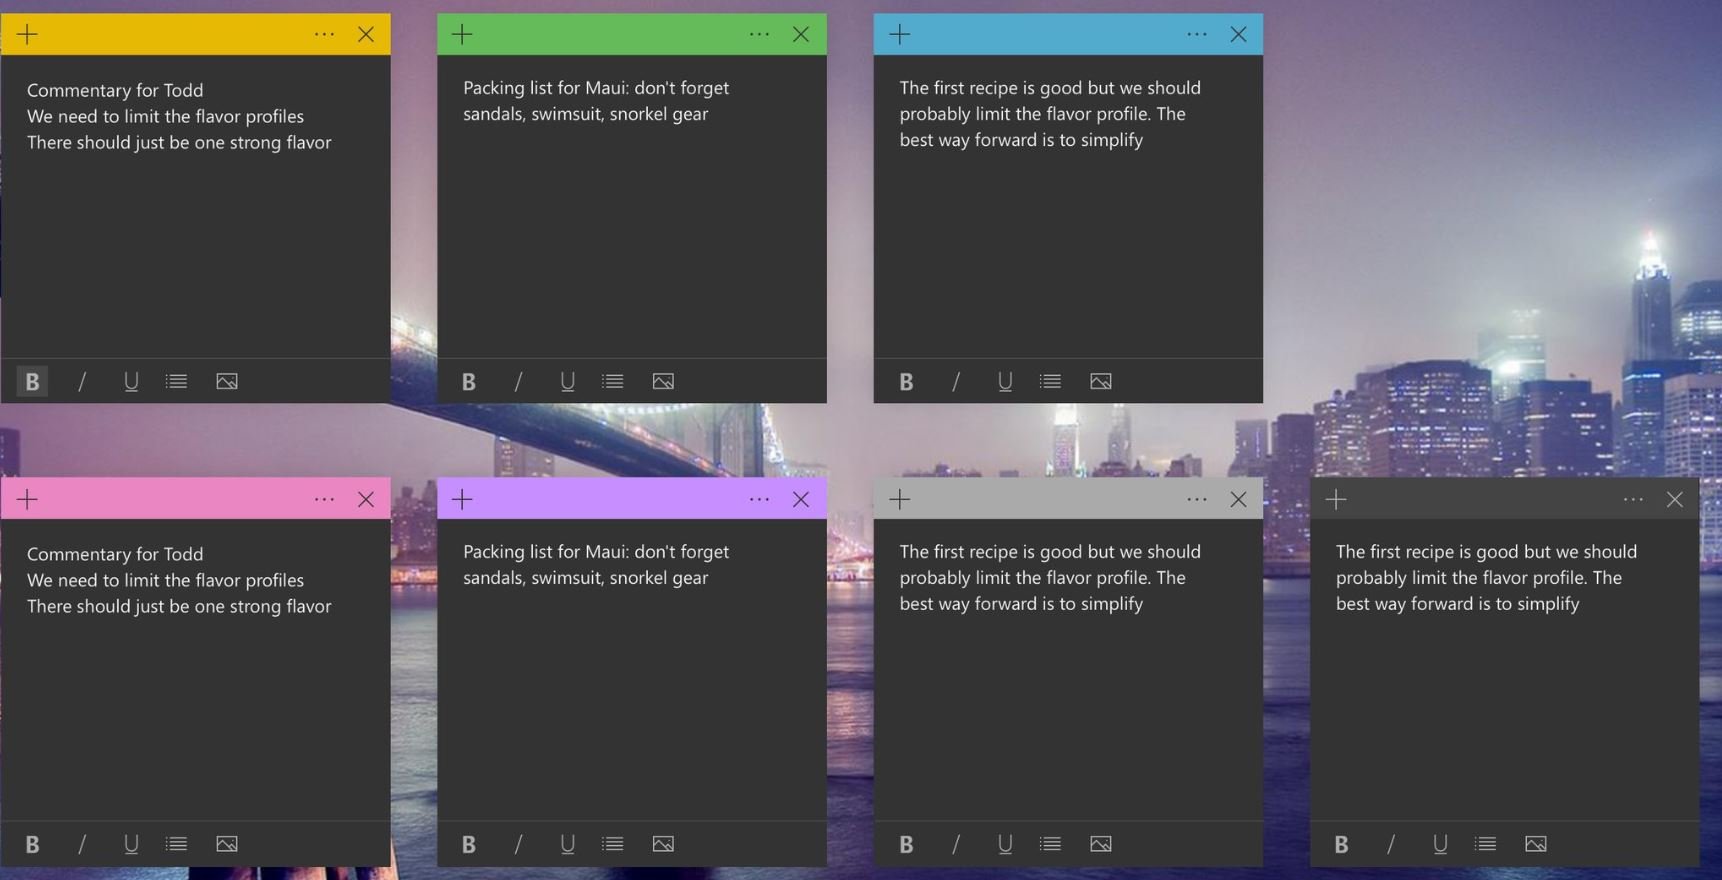 [Updated]Microsoft Sticky Notes for Windows 10 is now called ‘Memo’